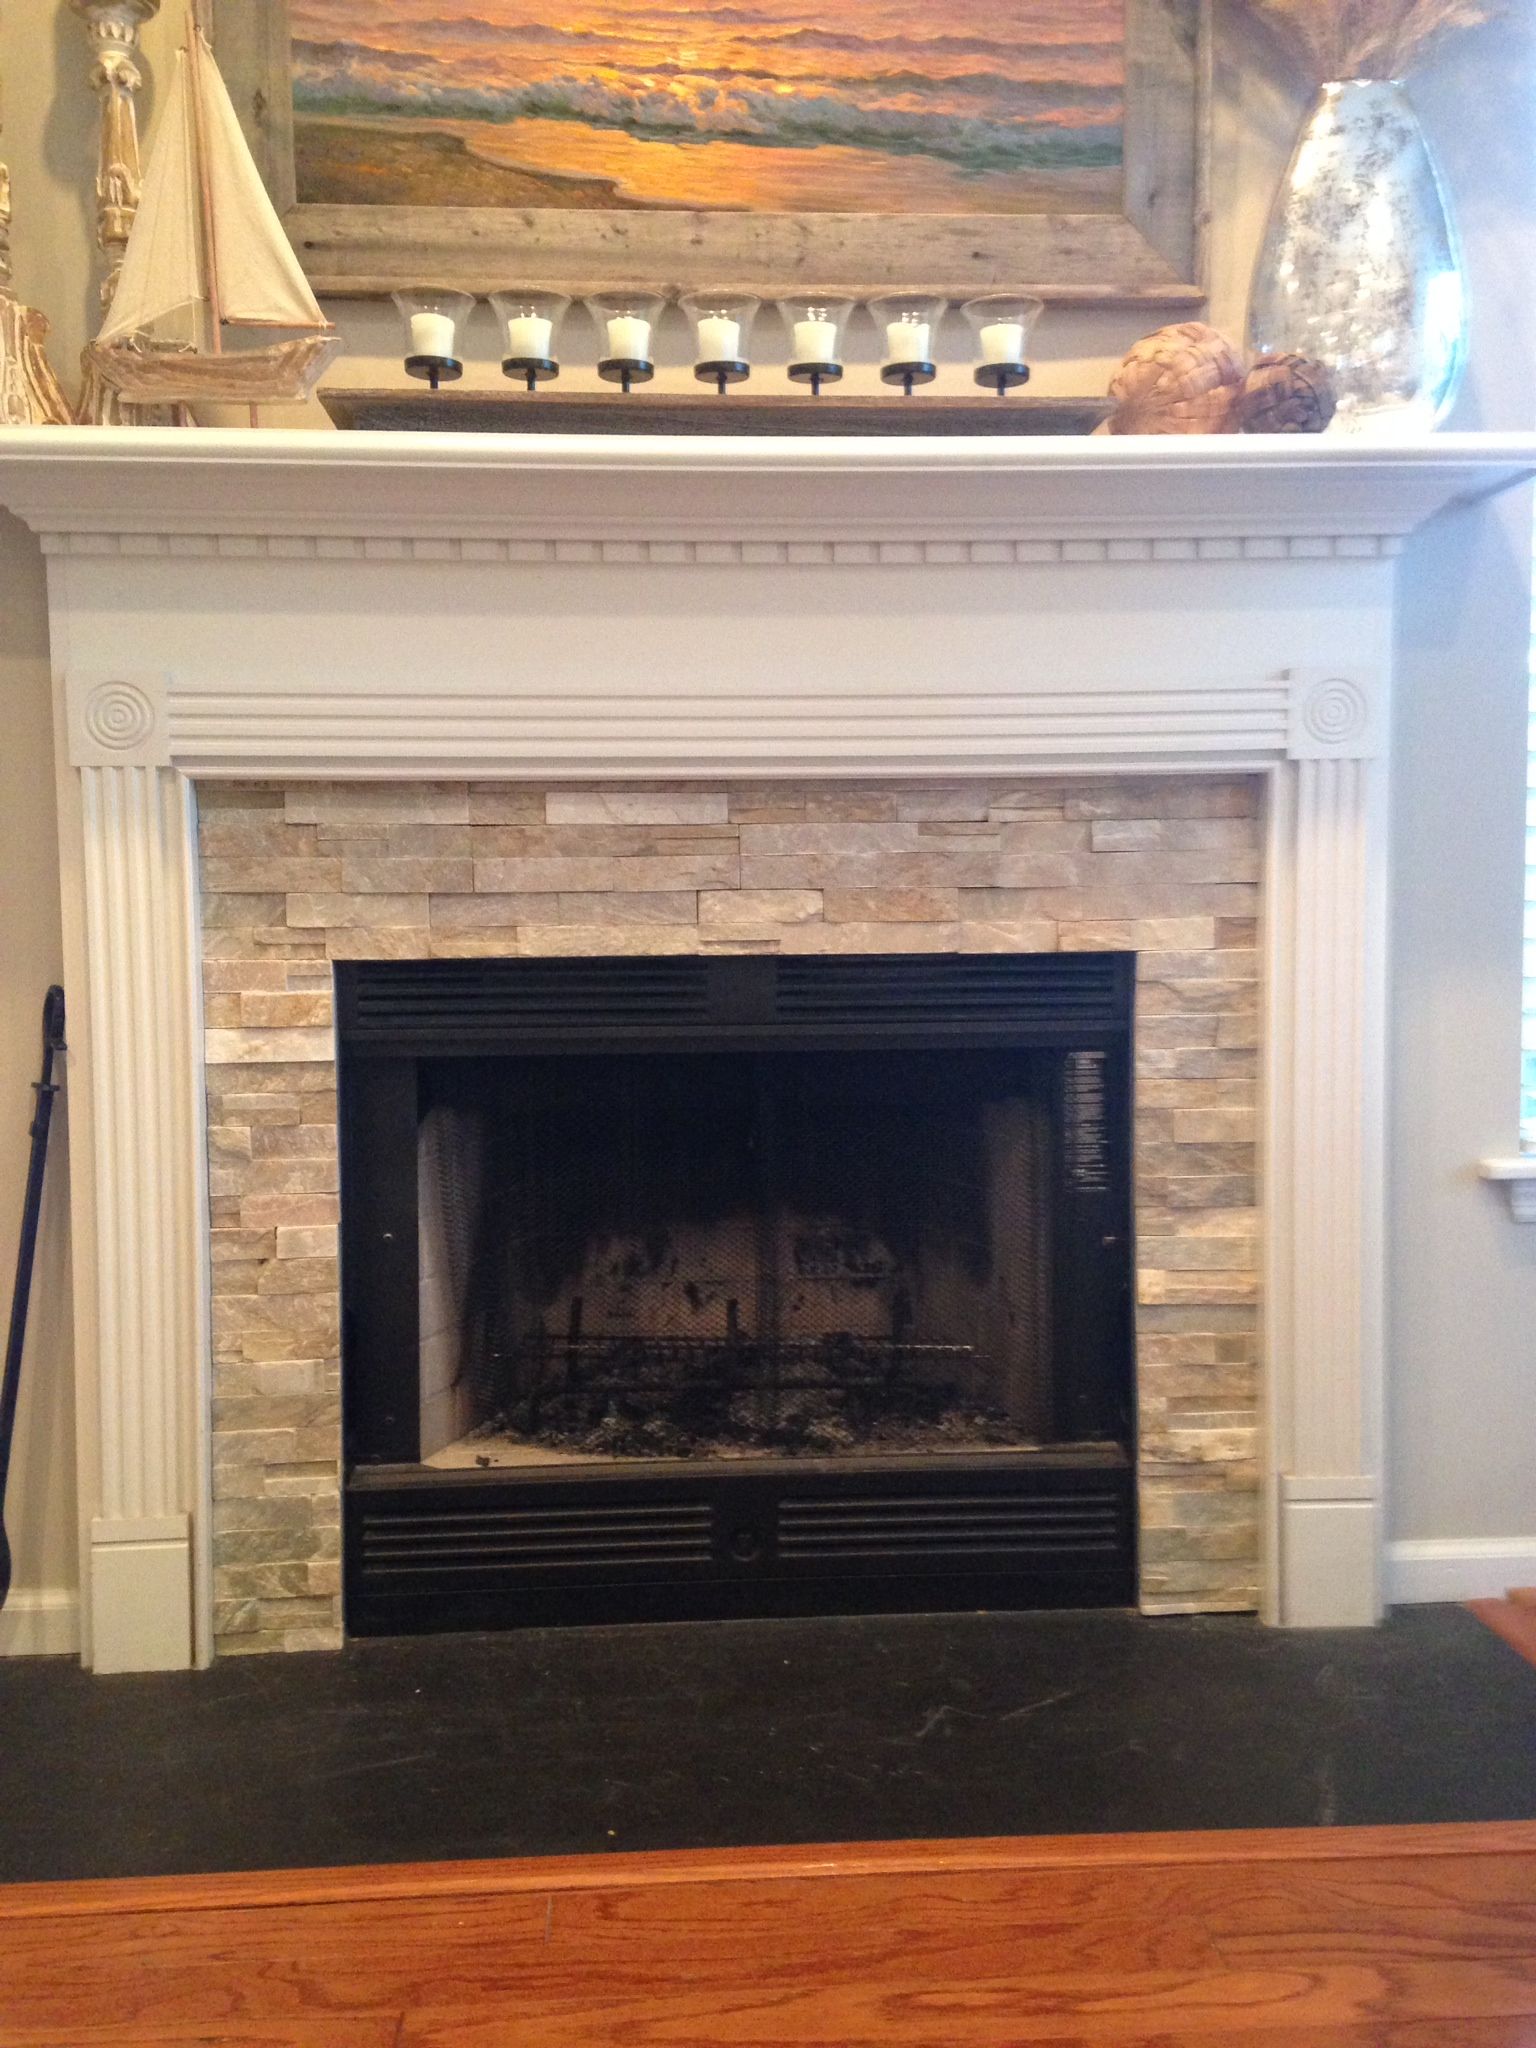 How to Install A Mantel On A Stone Fireplace Inspirational Fireplace Idea Mantel Wainscoting Design Craftsman